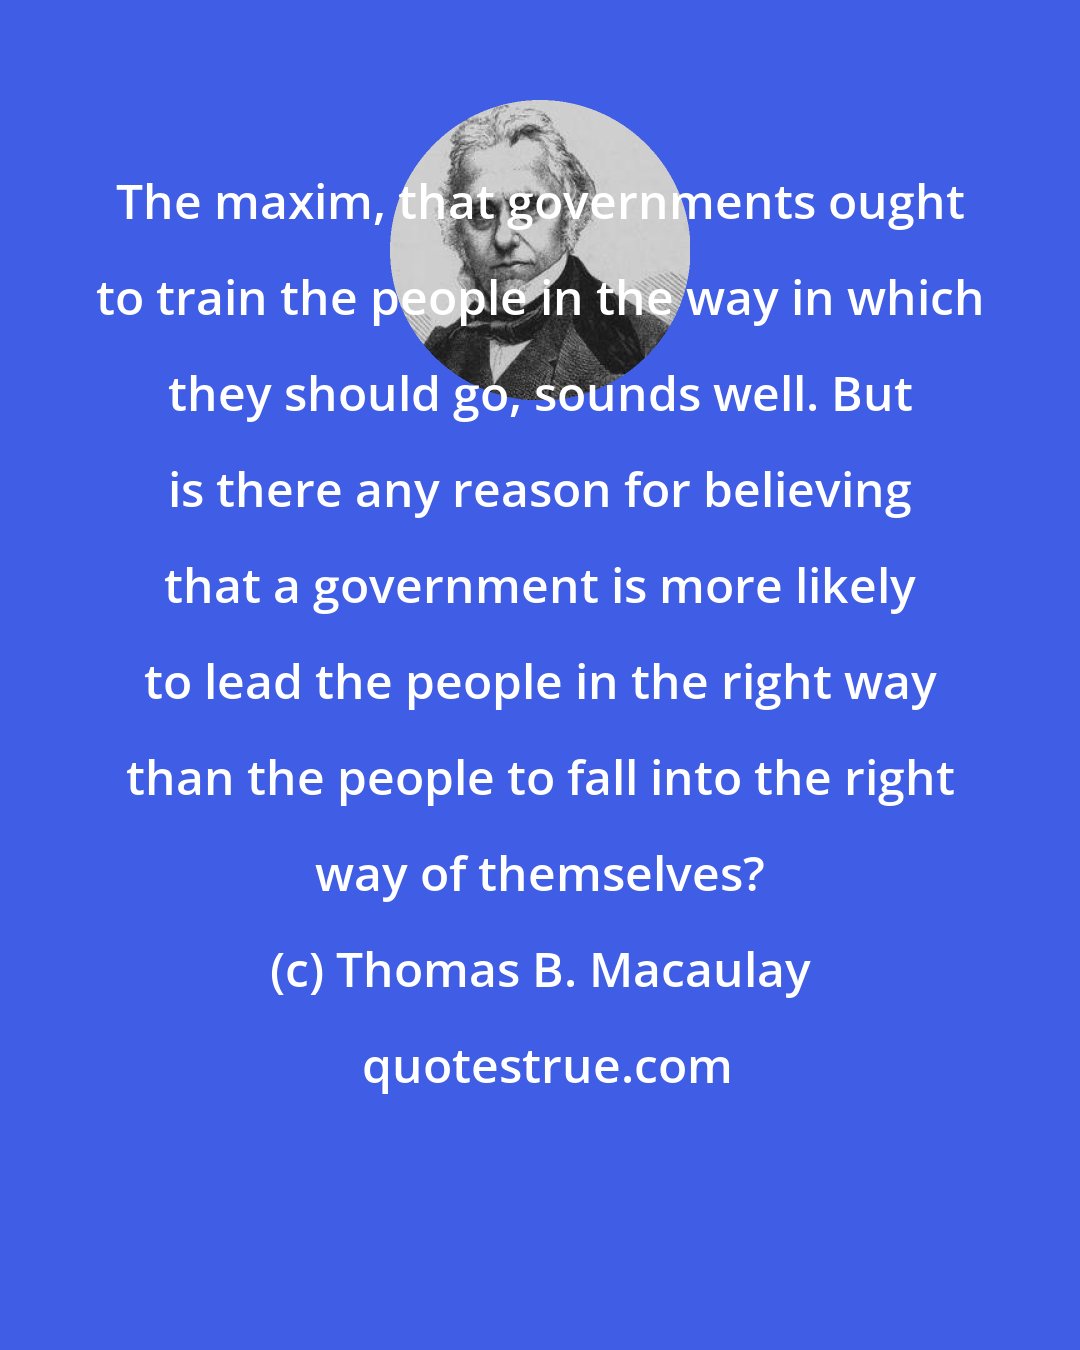 Thomas B. Macaulay: The maxim, that governments ought to train the people in the way in which they should go, sounds well. But is there any reason for believing that a government is more likely to lead the people in the right way than the people to fall into the right way of themselves?